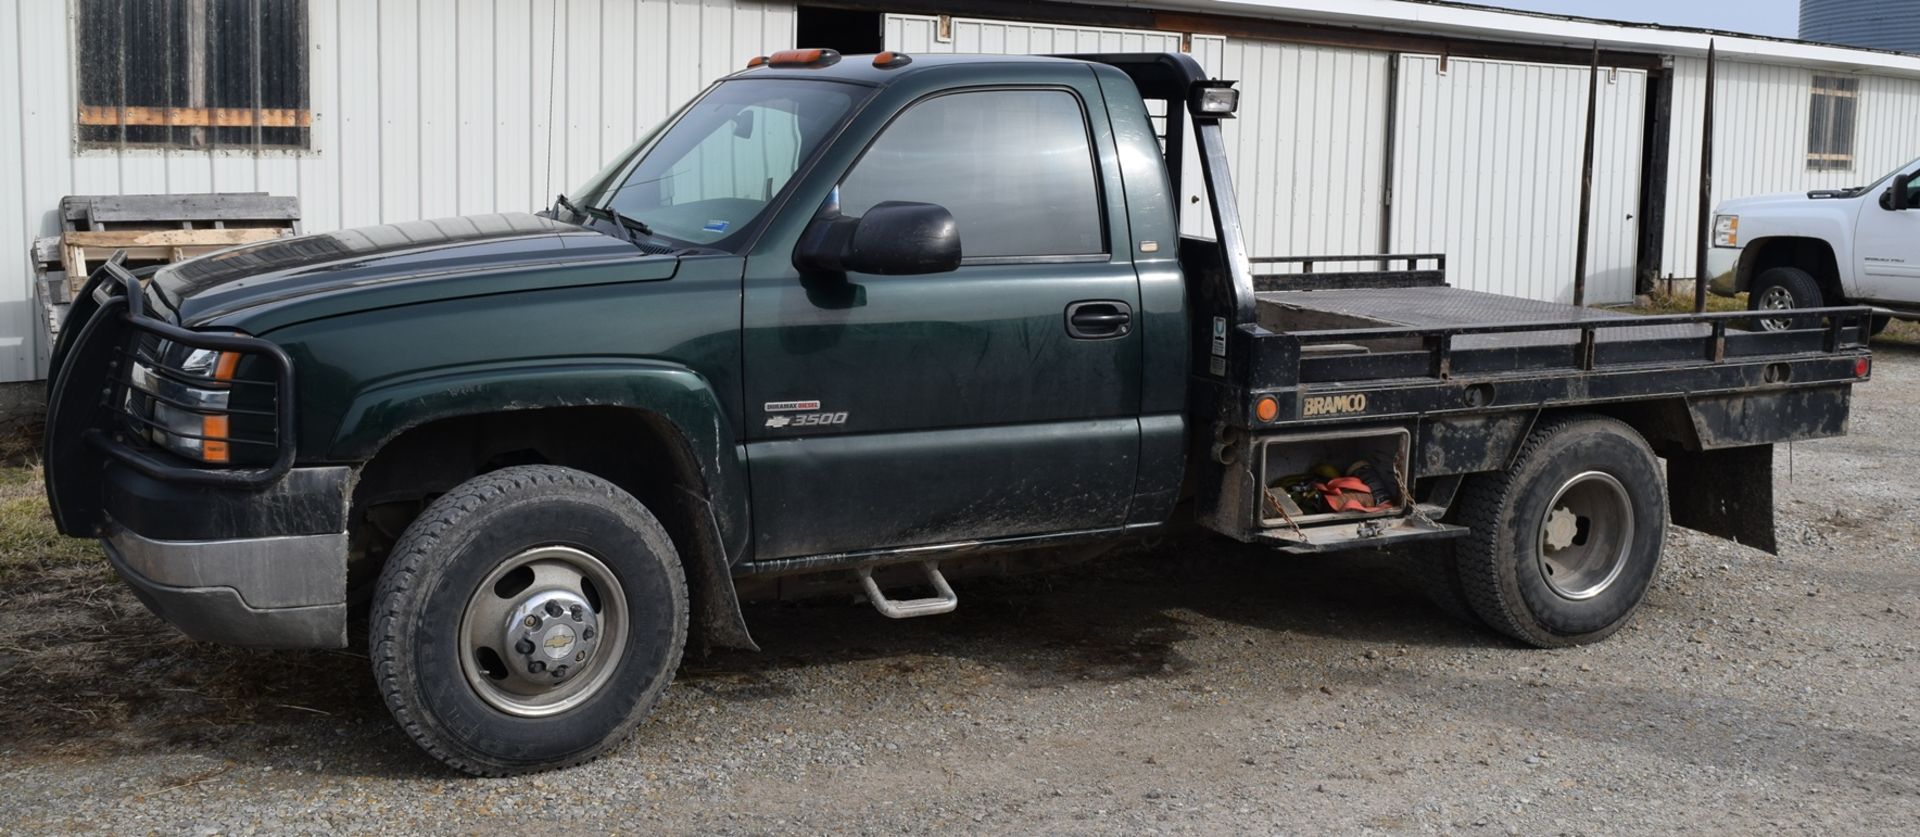 Lot 1076 2004 Chevy 3500 Duramax 4x4 dually flatbed with hydro bale spike, 6-speed manual - Image 4 of 4